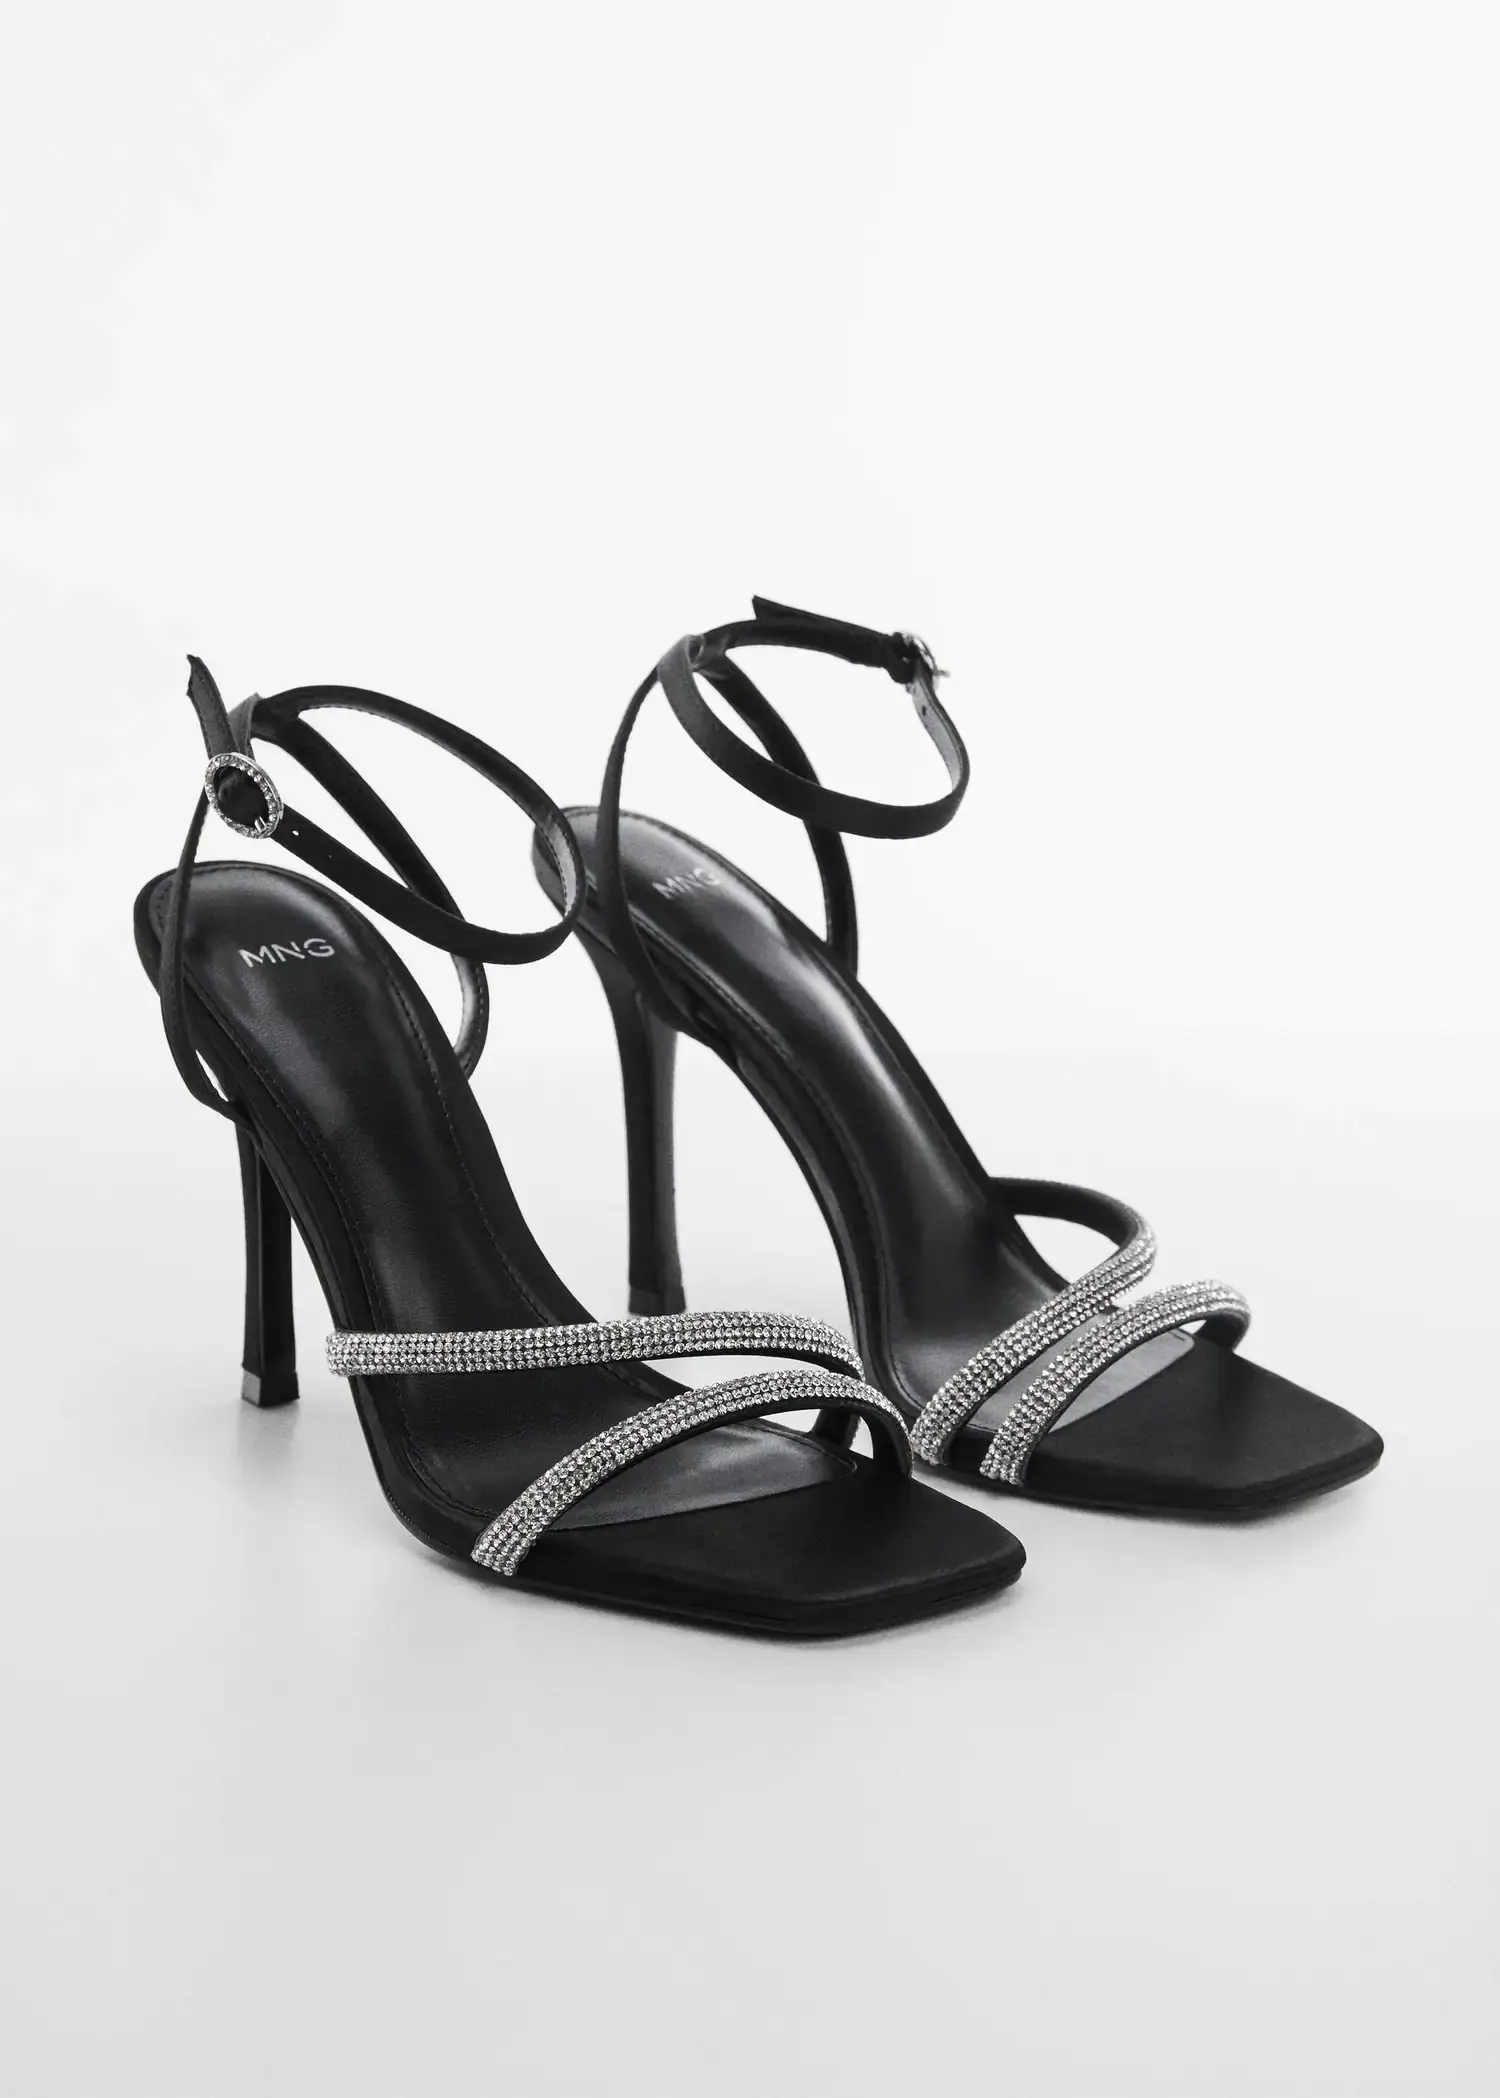 Mango Heeled sandals with rhinestone straps. a pair of high heeled shoes on a white surface. 